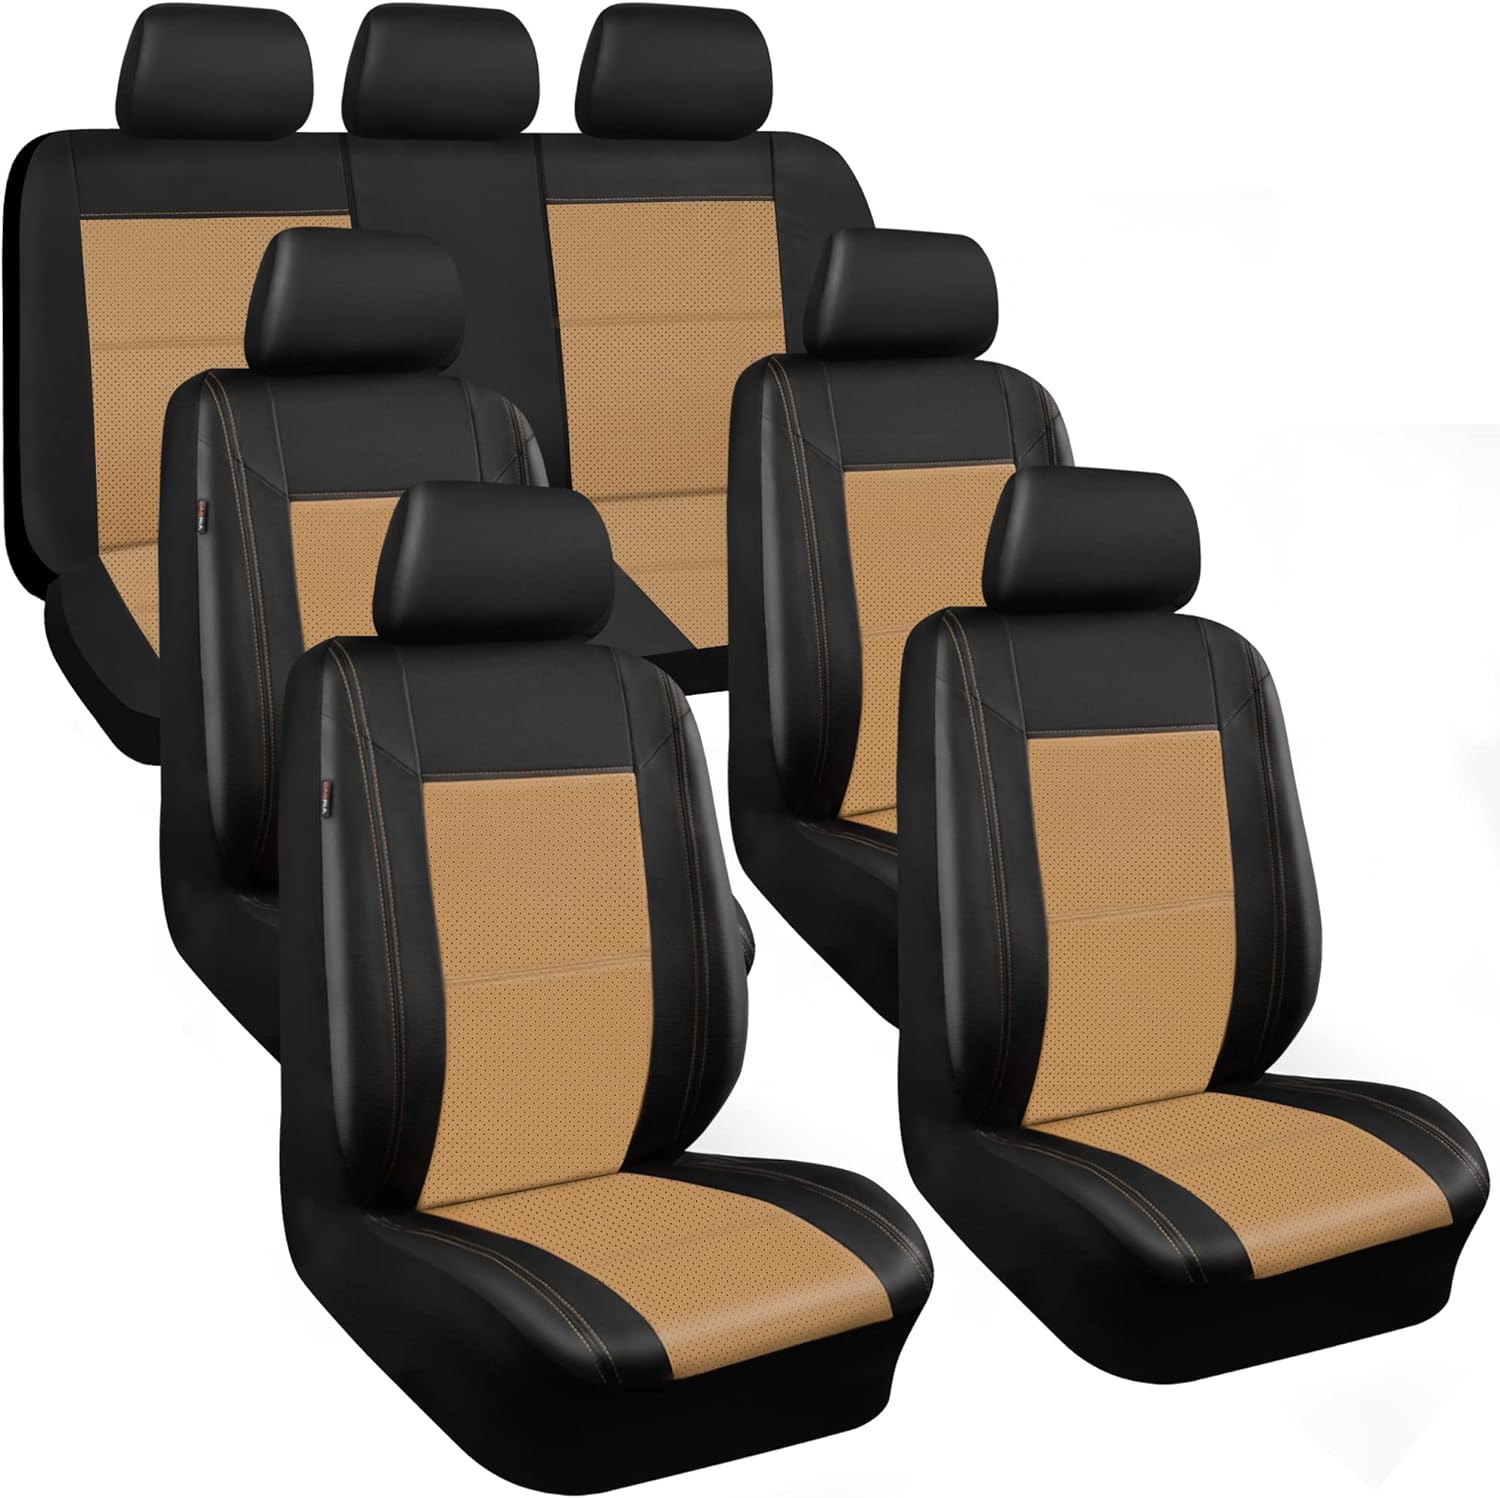 CAR PASS Three Row Car Seat Covers with 7 Headrests Universal Fit Seat Cover Set for Cars Auto Trucks SUV Airbag Compatible and Rear Split 7 Passenger Seat Covers Full Set